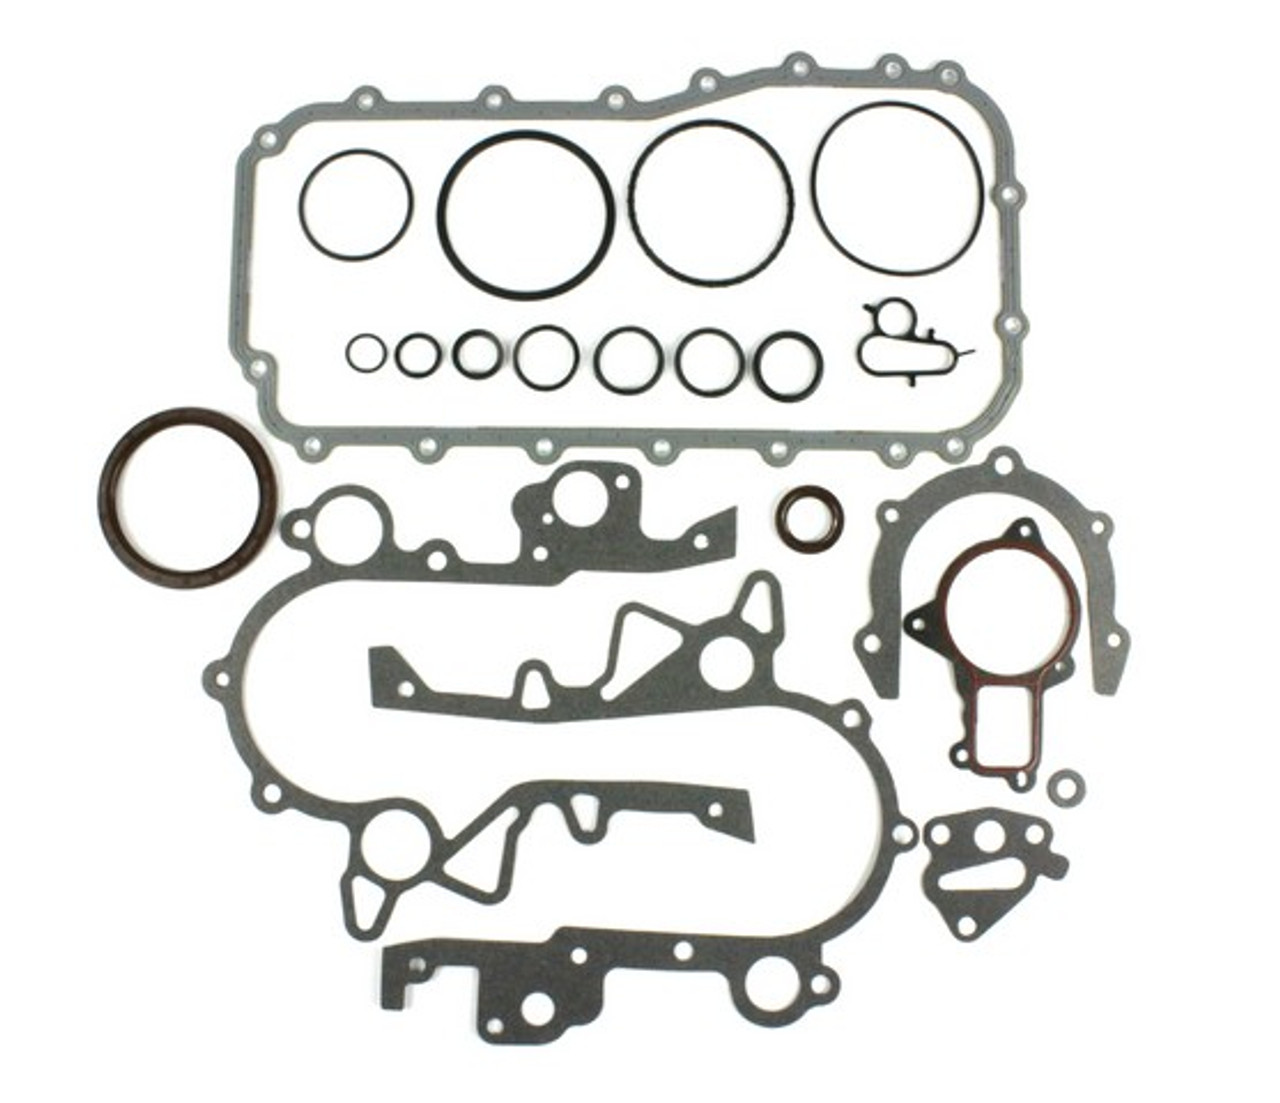 Lower Gasket Set 3.3L 1998 Chrysler Town & Country - LGS1135.43